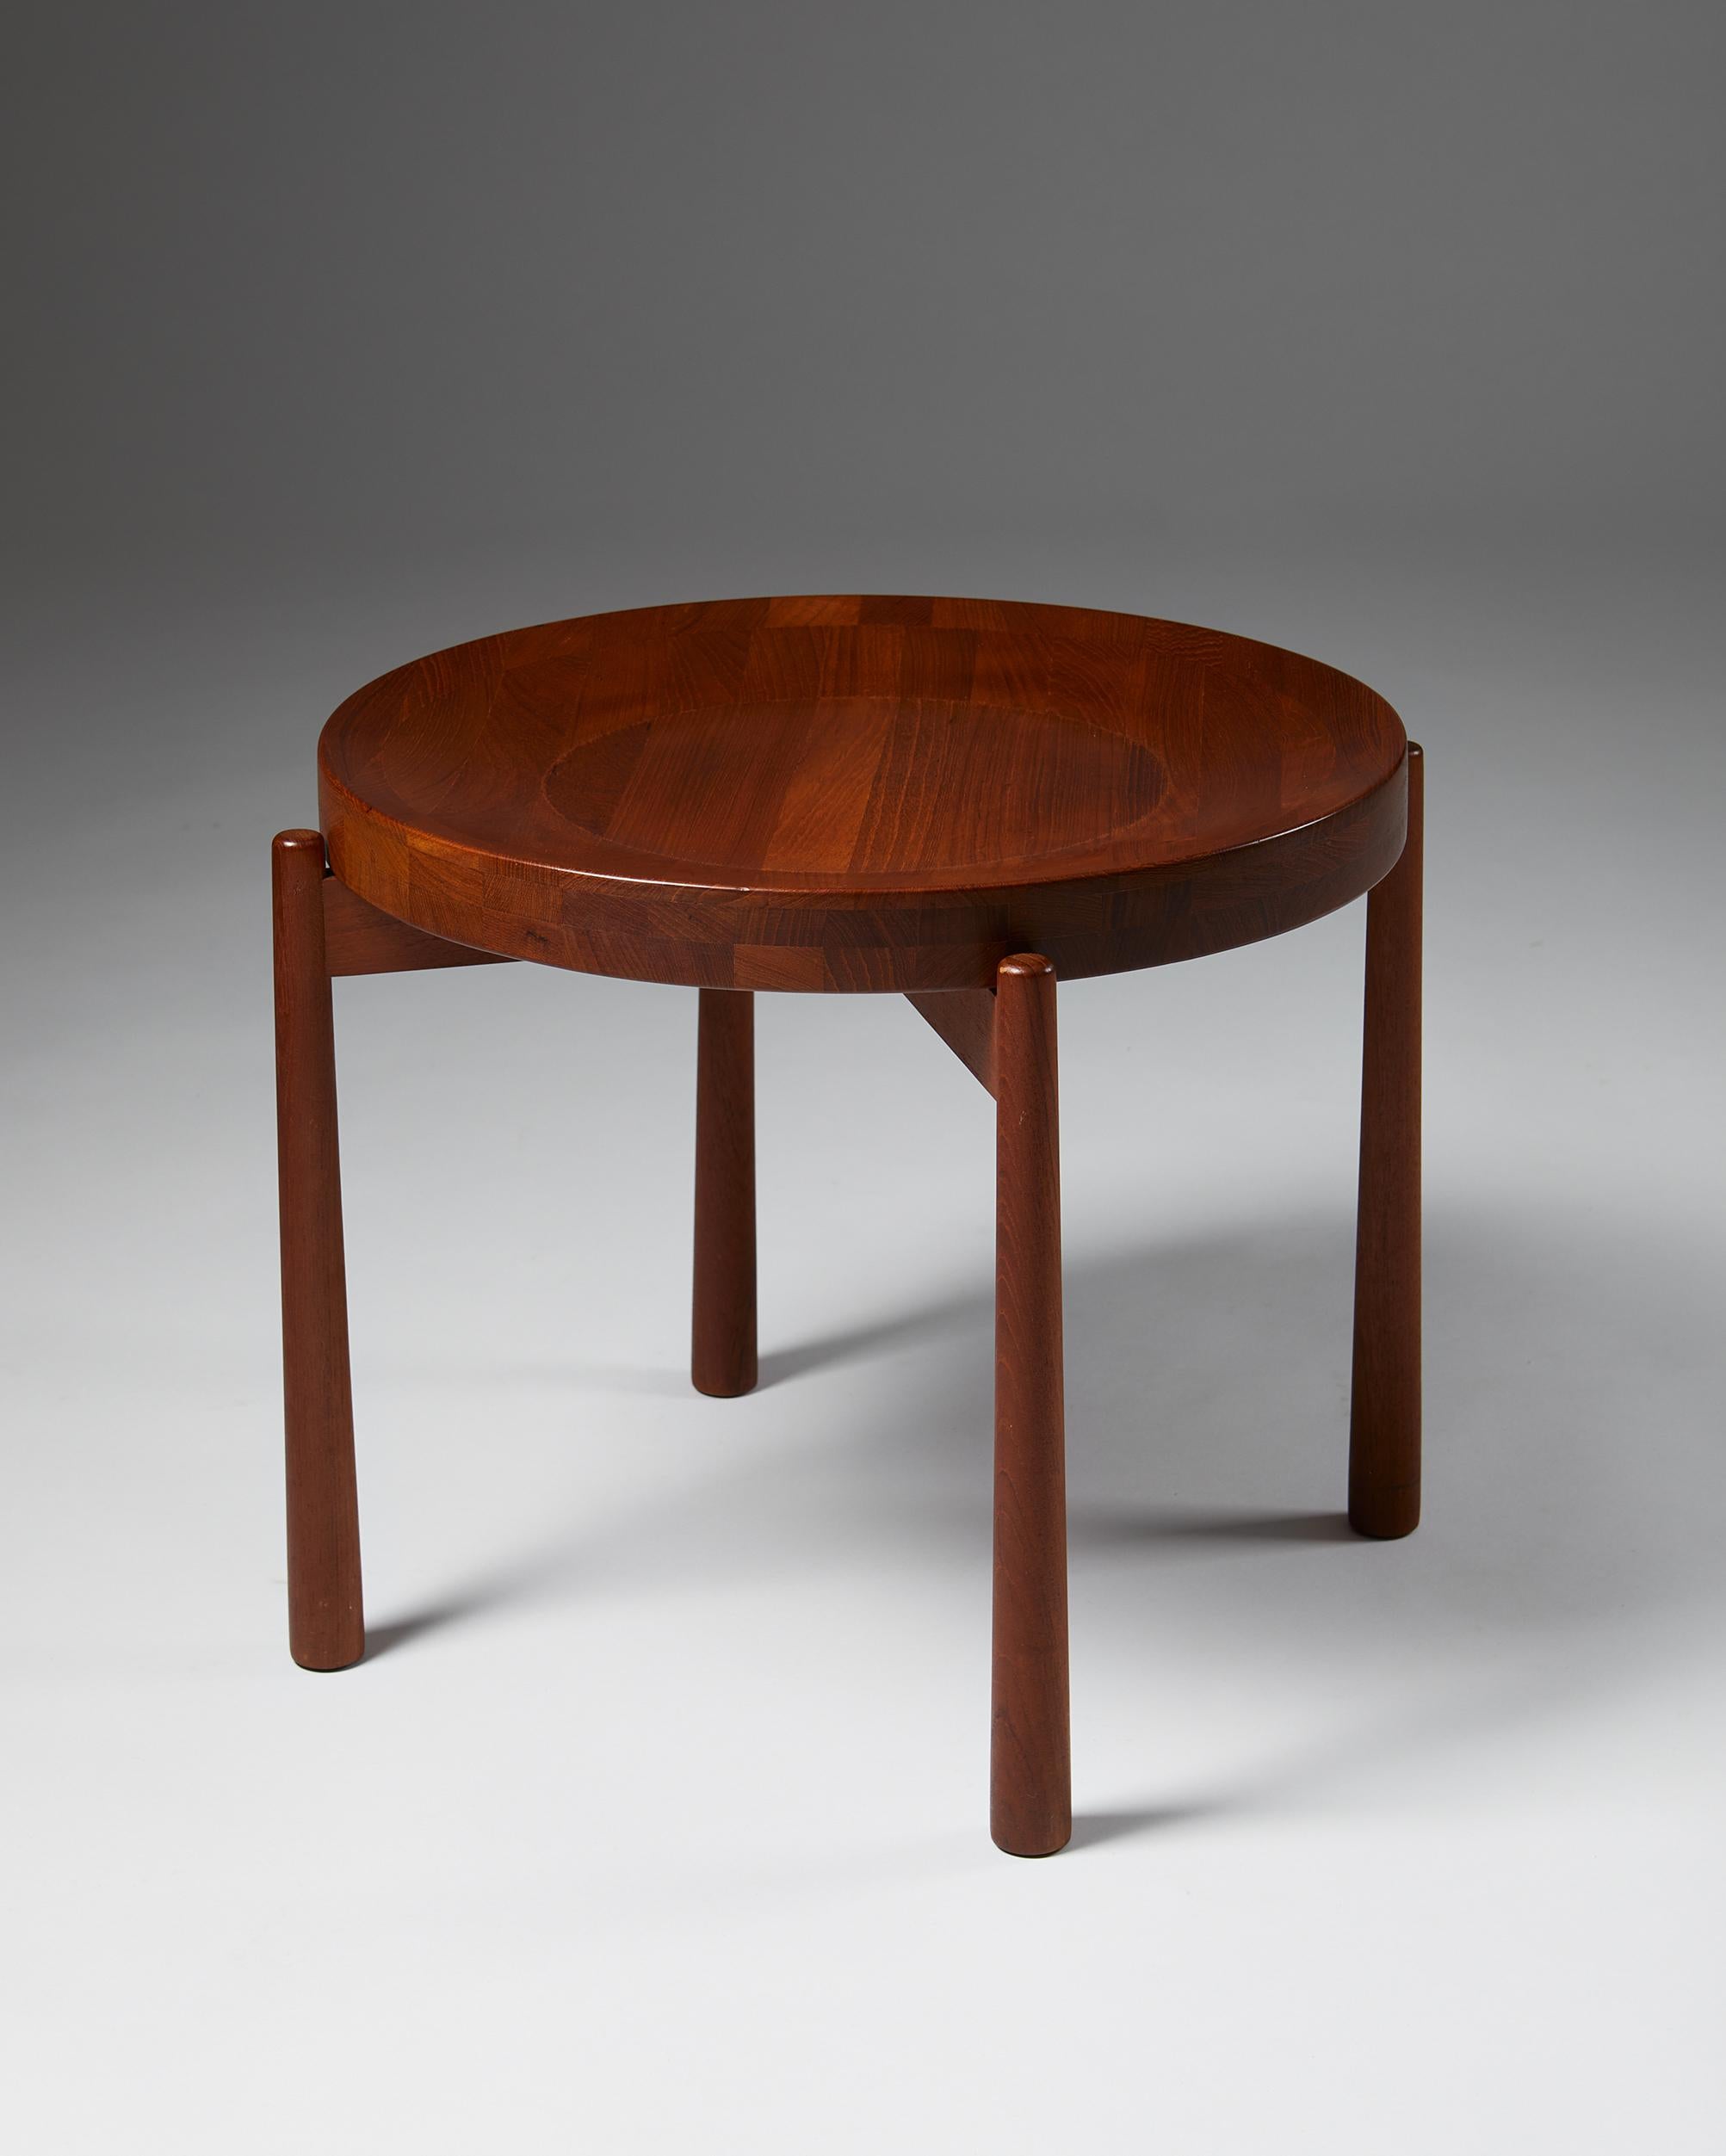 Mid-Century Modern Tray tables designed by Jens Quistgaard